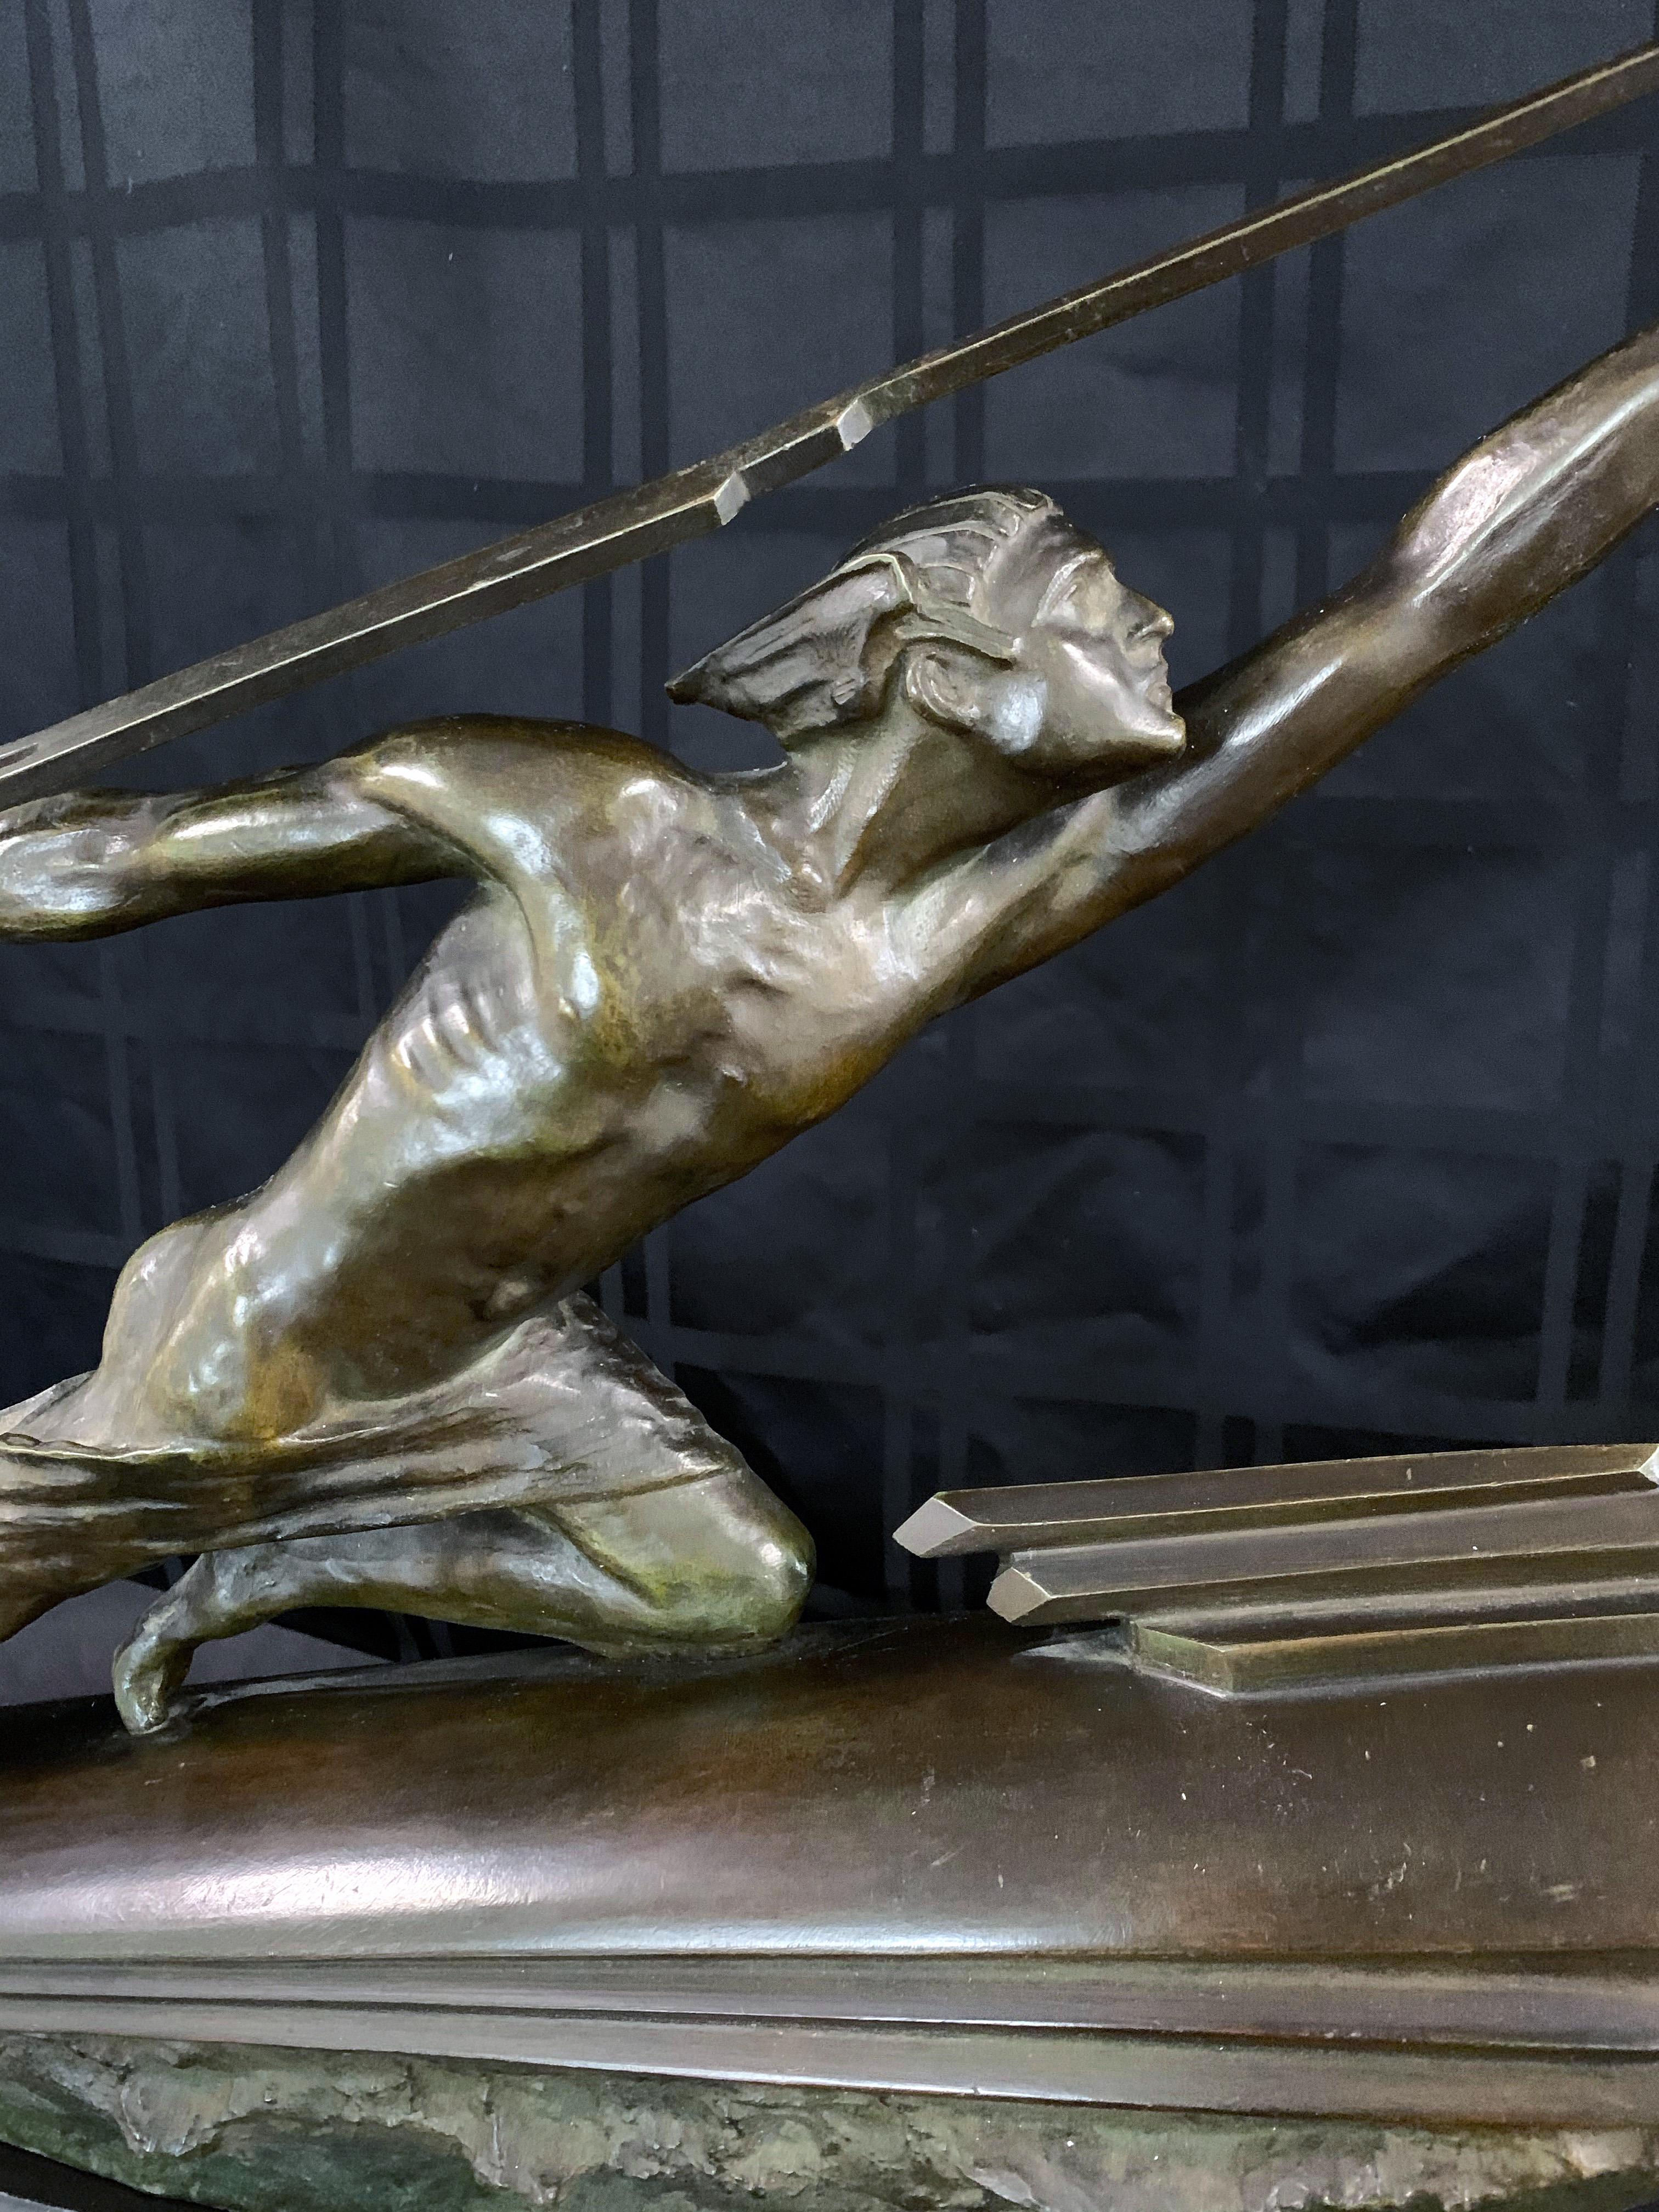 Truly spectacular in its size and execution, this 36-inch wide bronze sculpture depicts a stylized, nude Mercury figure holding a bolt of lightning and riding an Art Deco rocket reminiscent of early, streamlined power boats in the 1930s. Of course